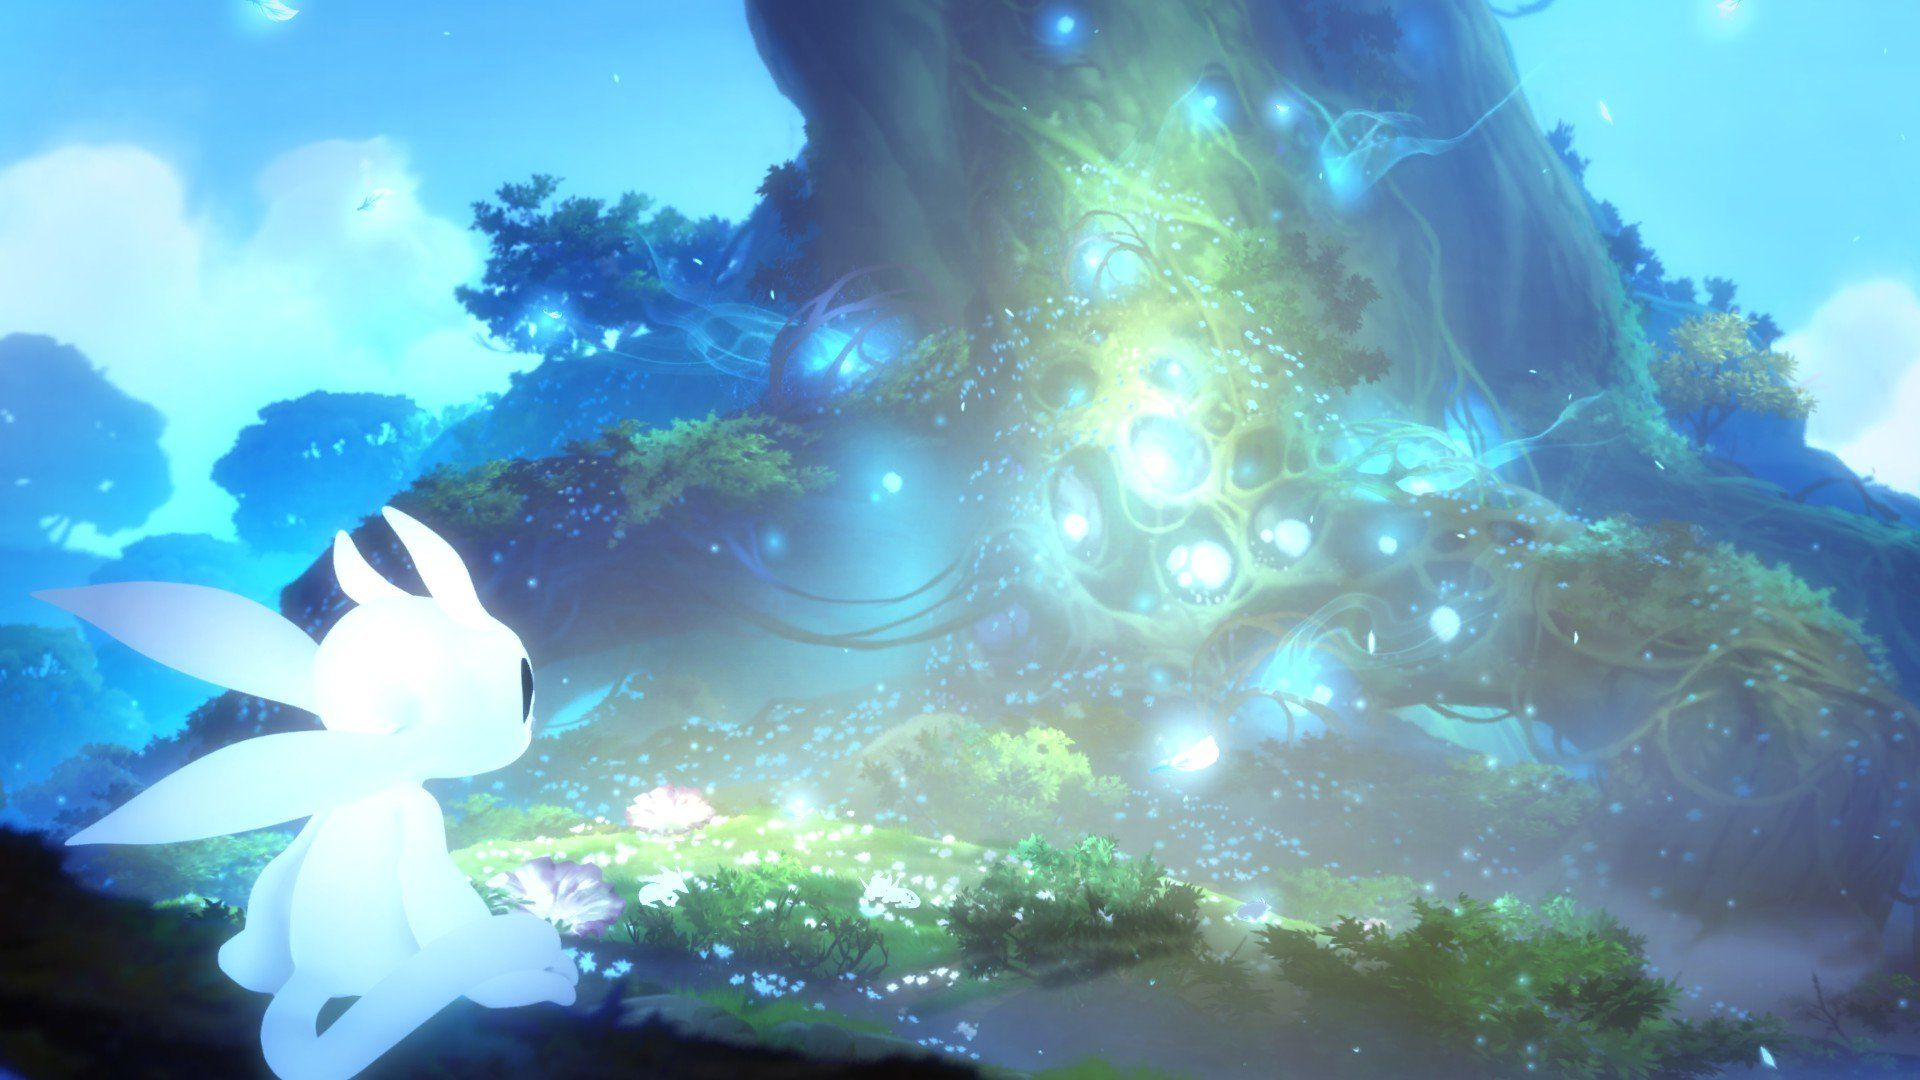 1920x1080 Ori and the Blind Forest Game Art, Johannes Figlhuber | Forest wallpaper, Forest games, Game art